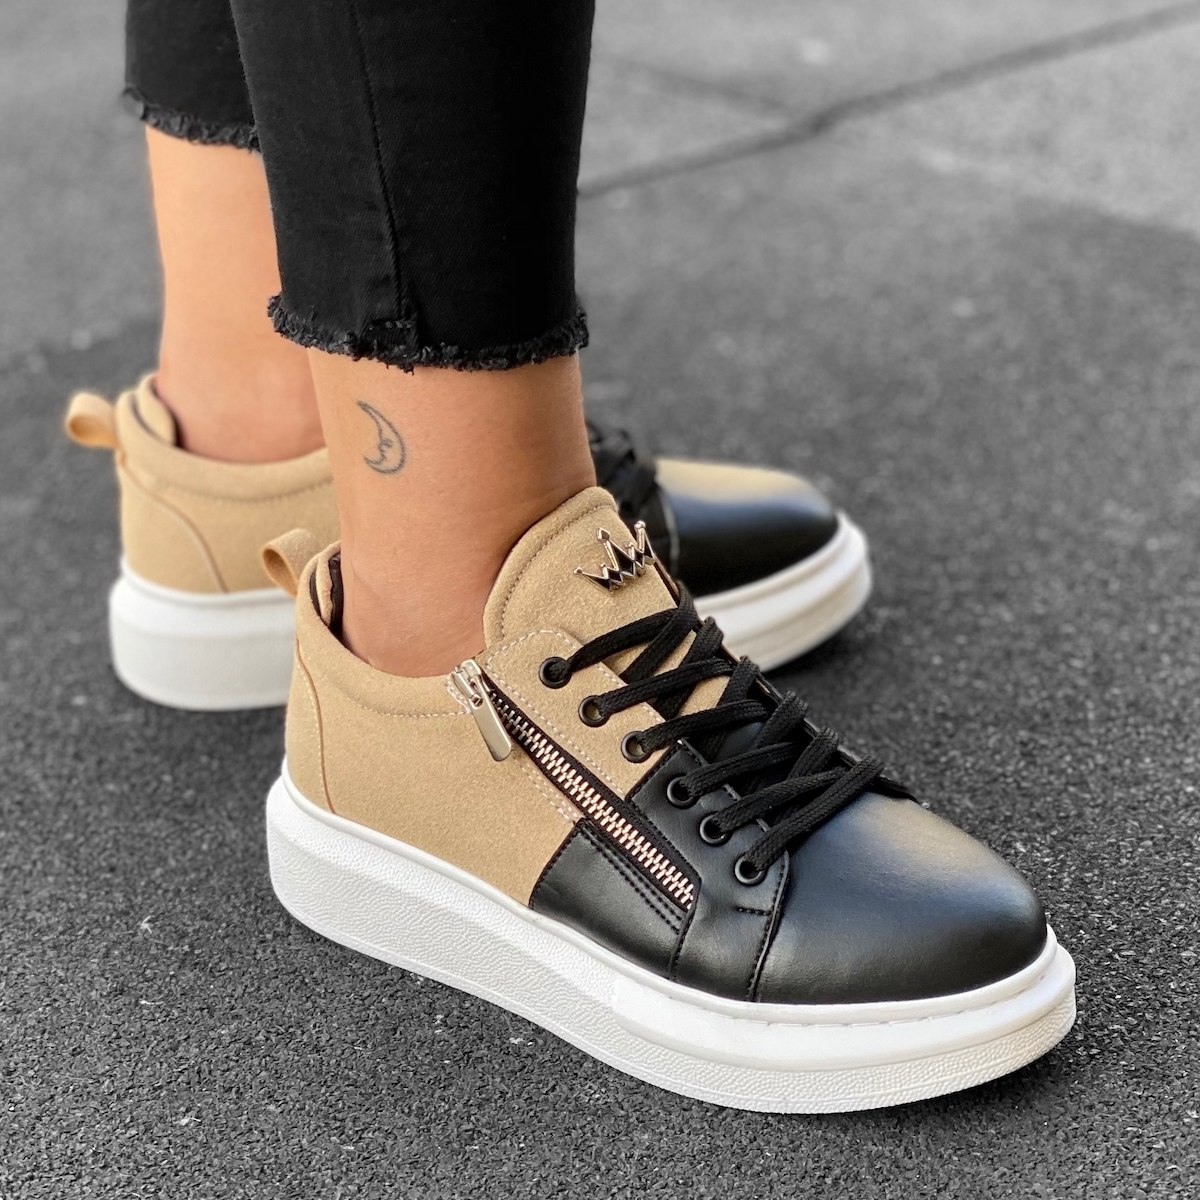 Women's Chunky Sneakers with Zippers in Cream and Black | Martin Valen